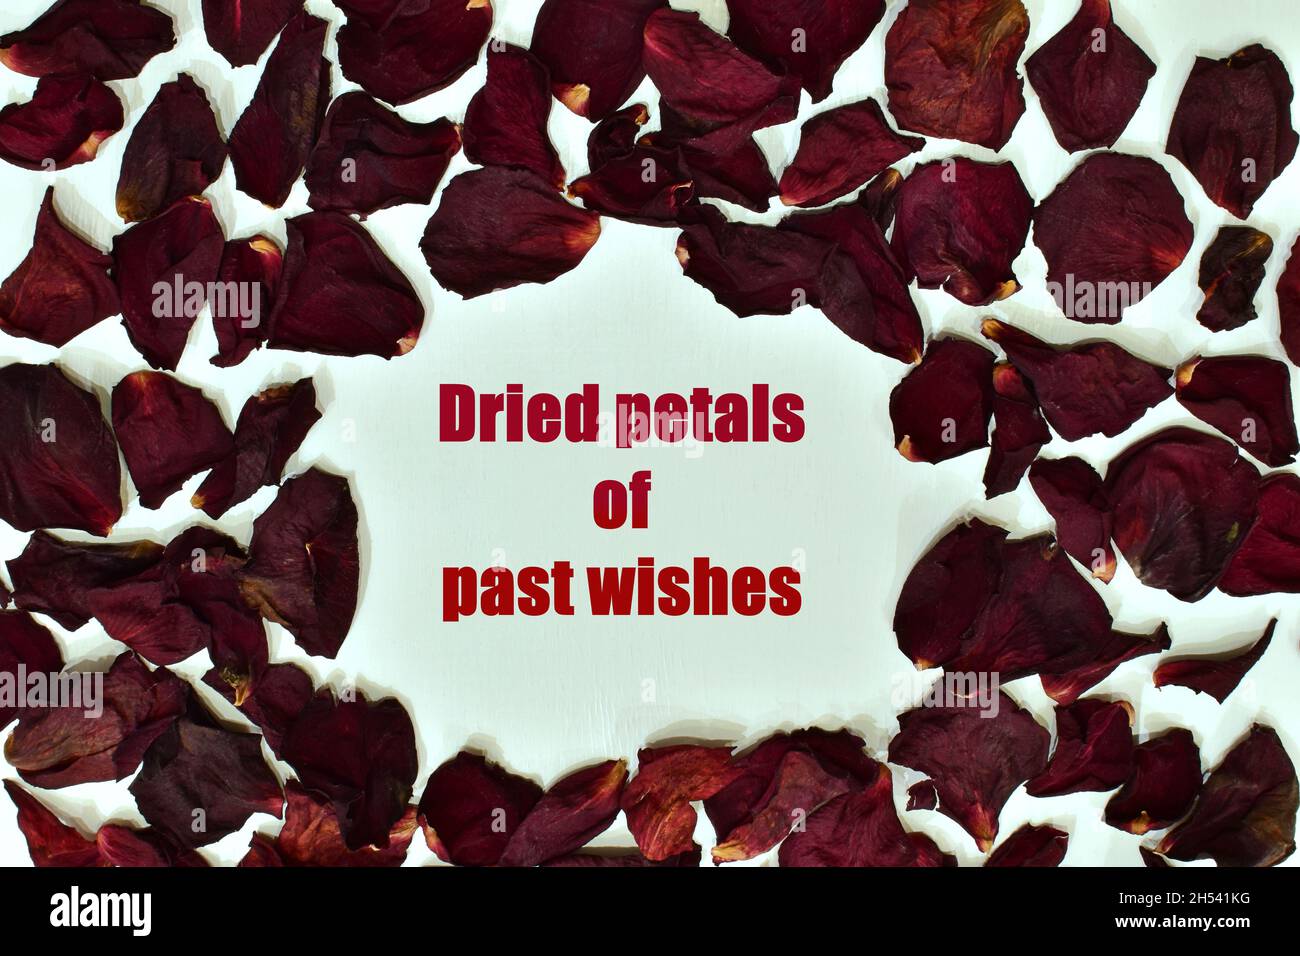 Red rose fallen dried petals on white background with the text in the center Stock Photo